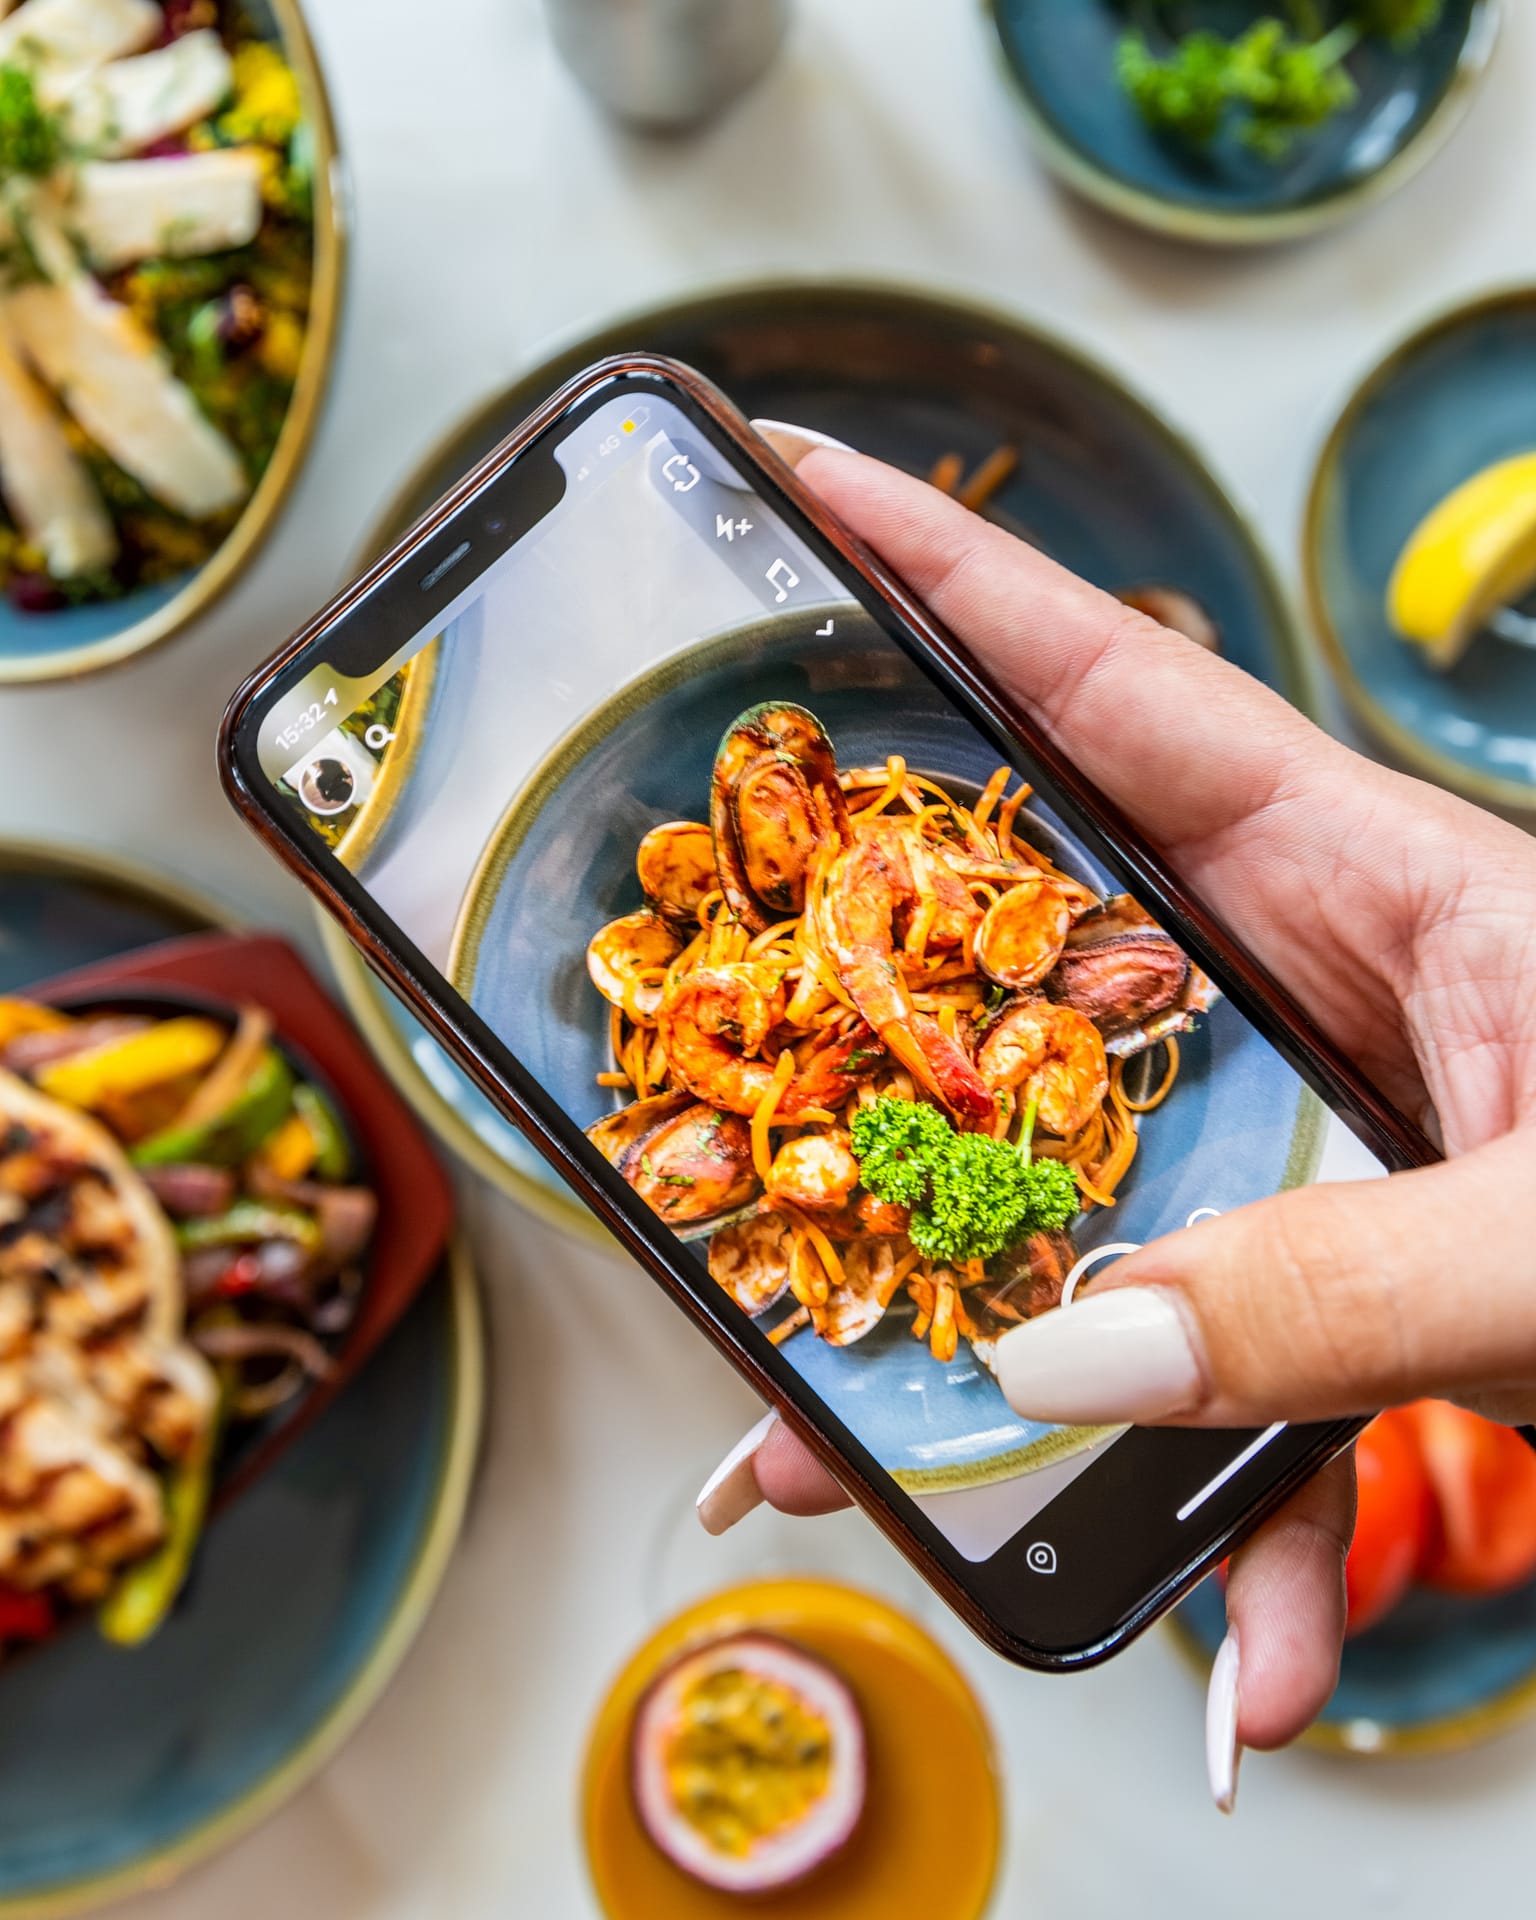 Creating mobile signal in the food service industry